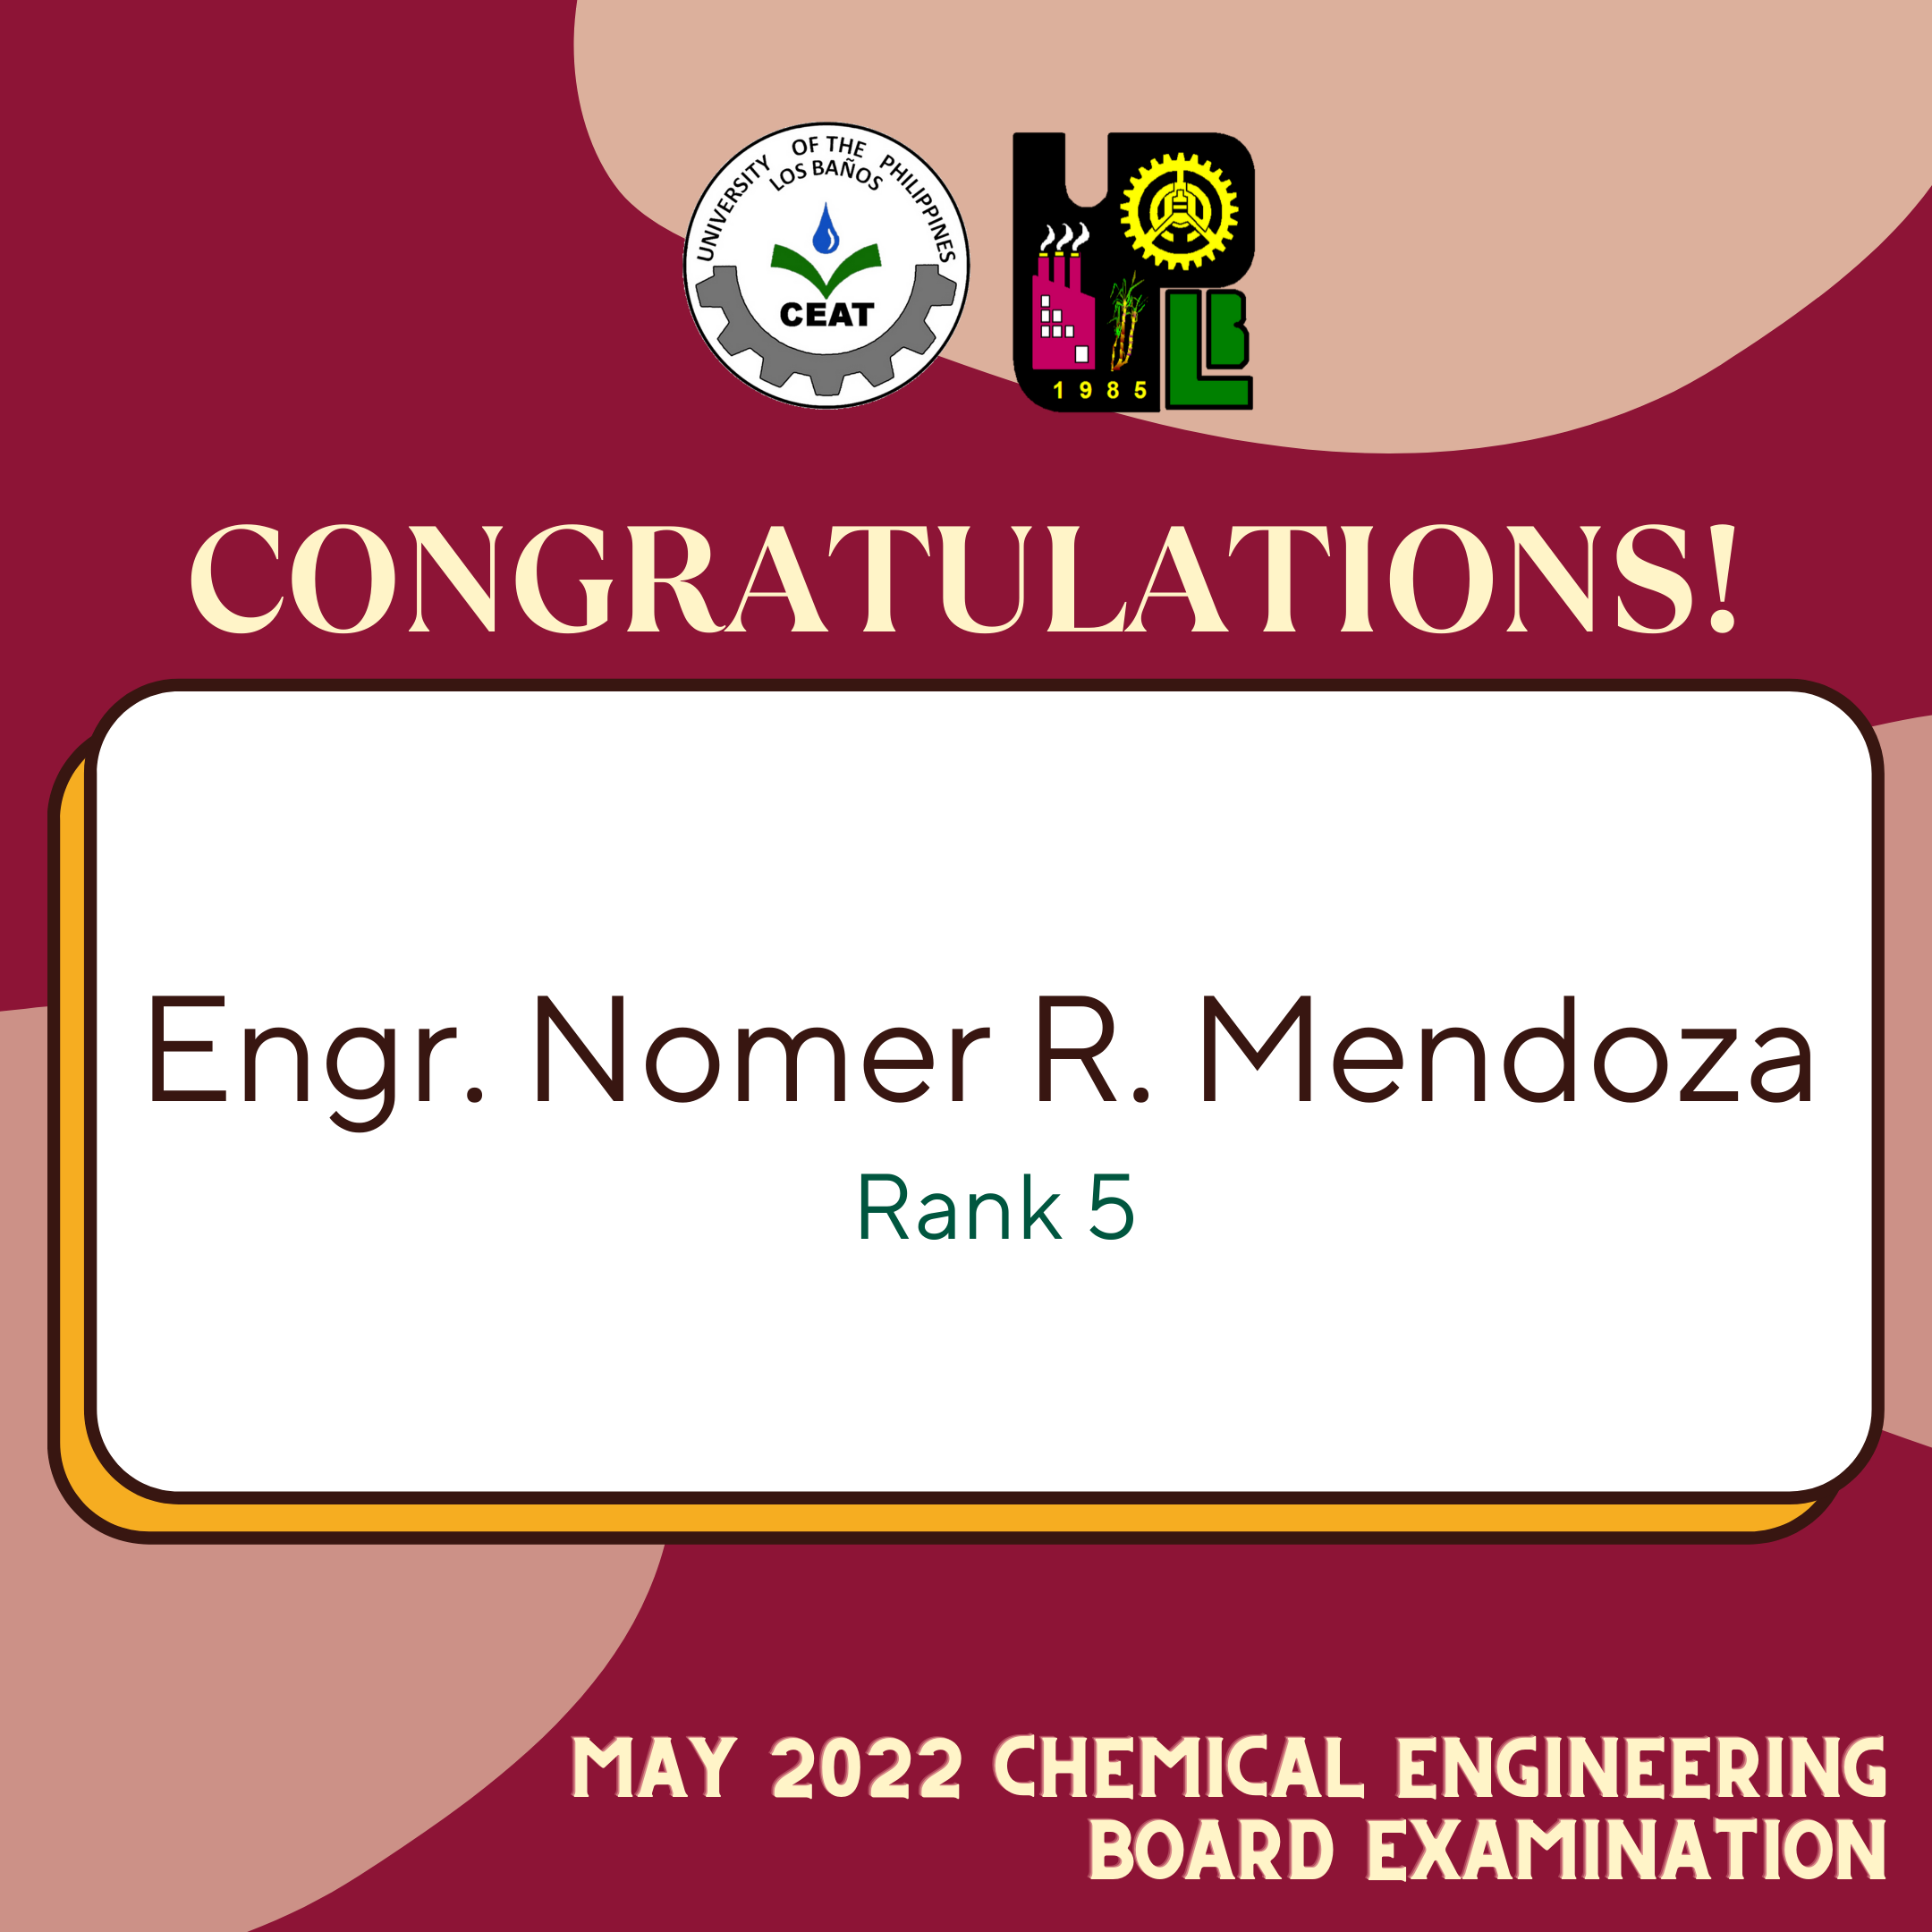 May 2022 Chemical Eng’g Board Topnotcher